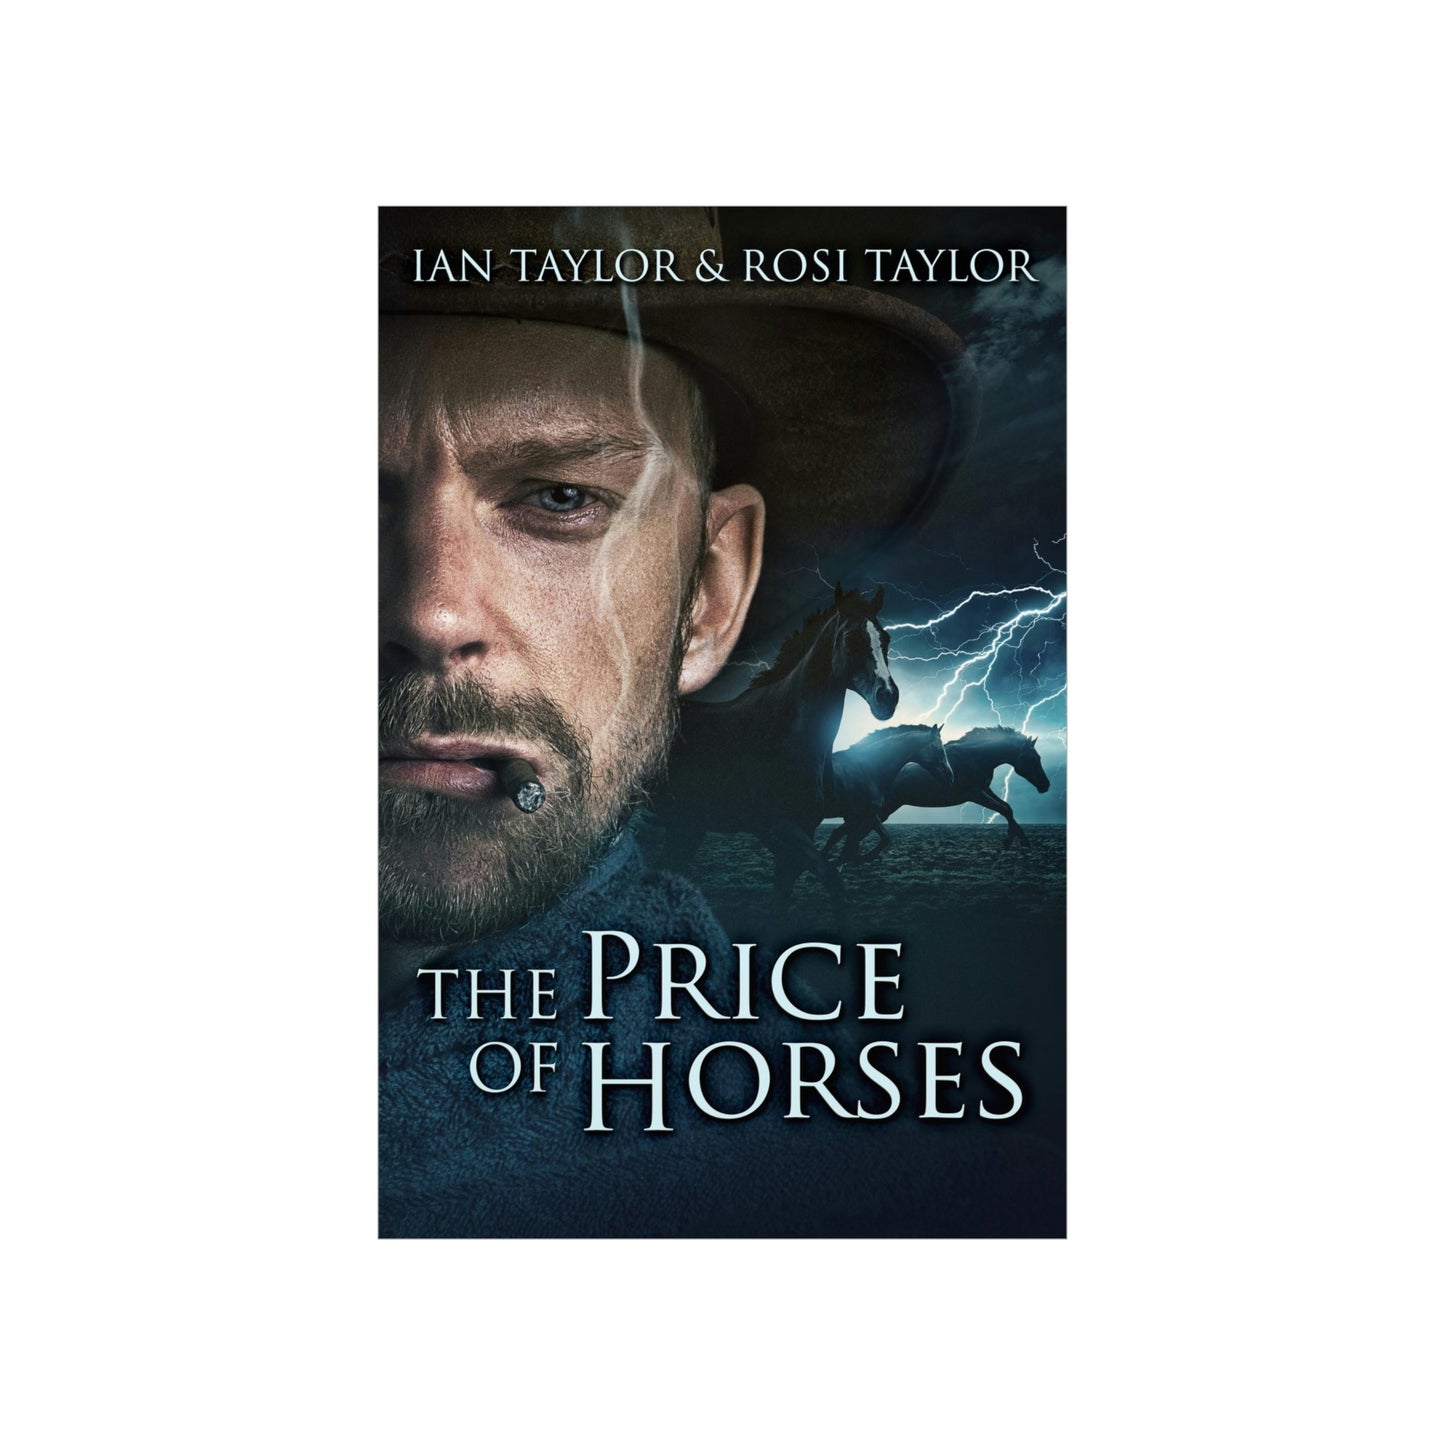 The Price Of Horses - Matte Poster